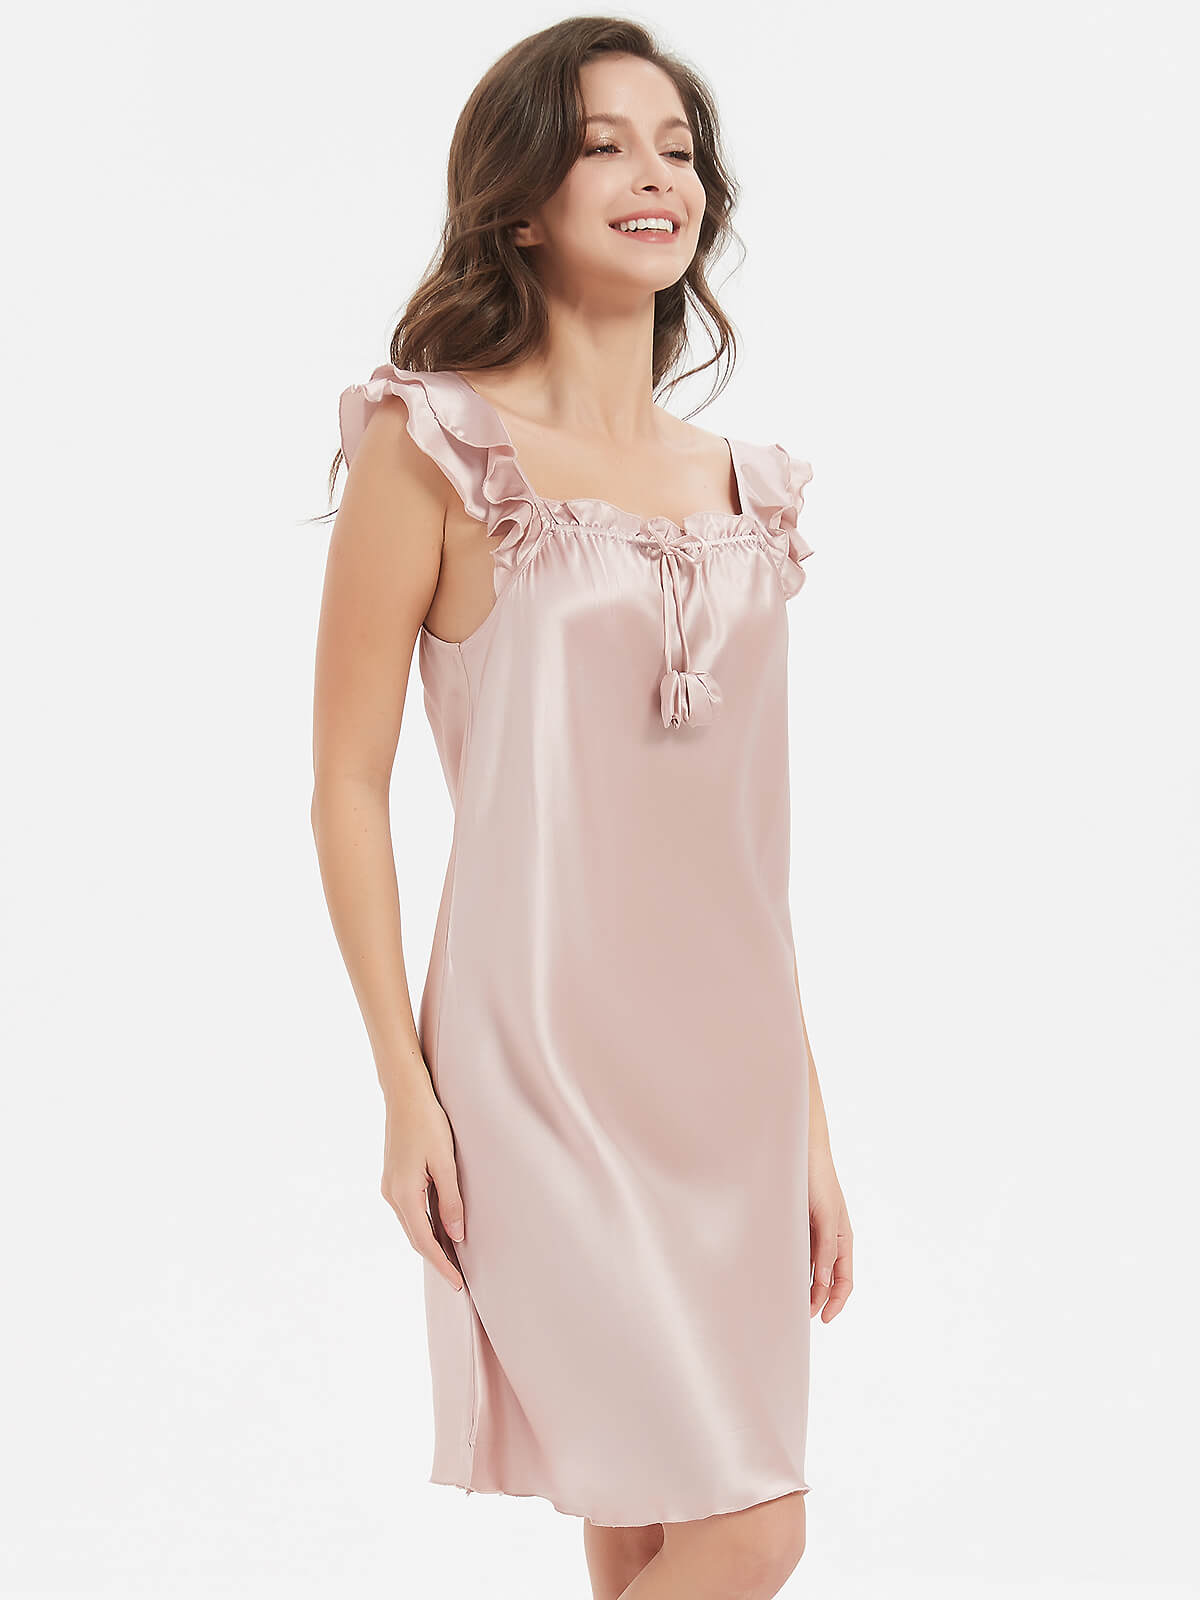 19 Momme Ruffled Strap Pink Silk Nightgown With Sweet Flowers